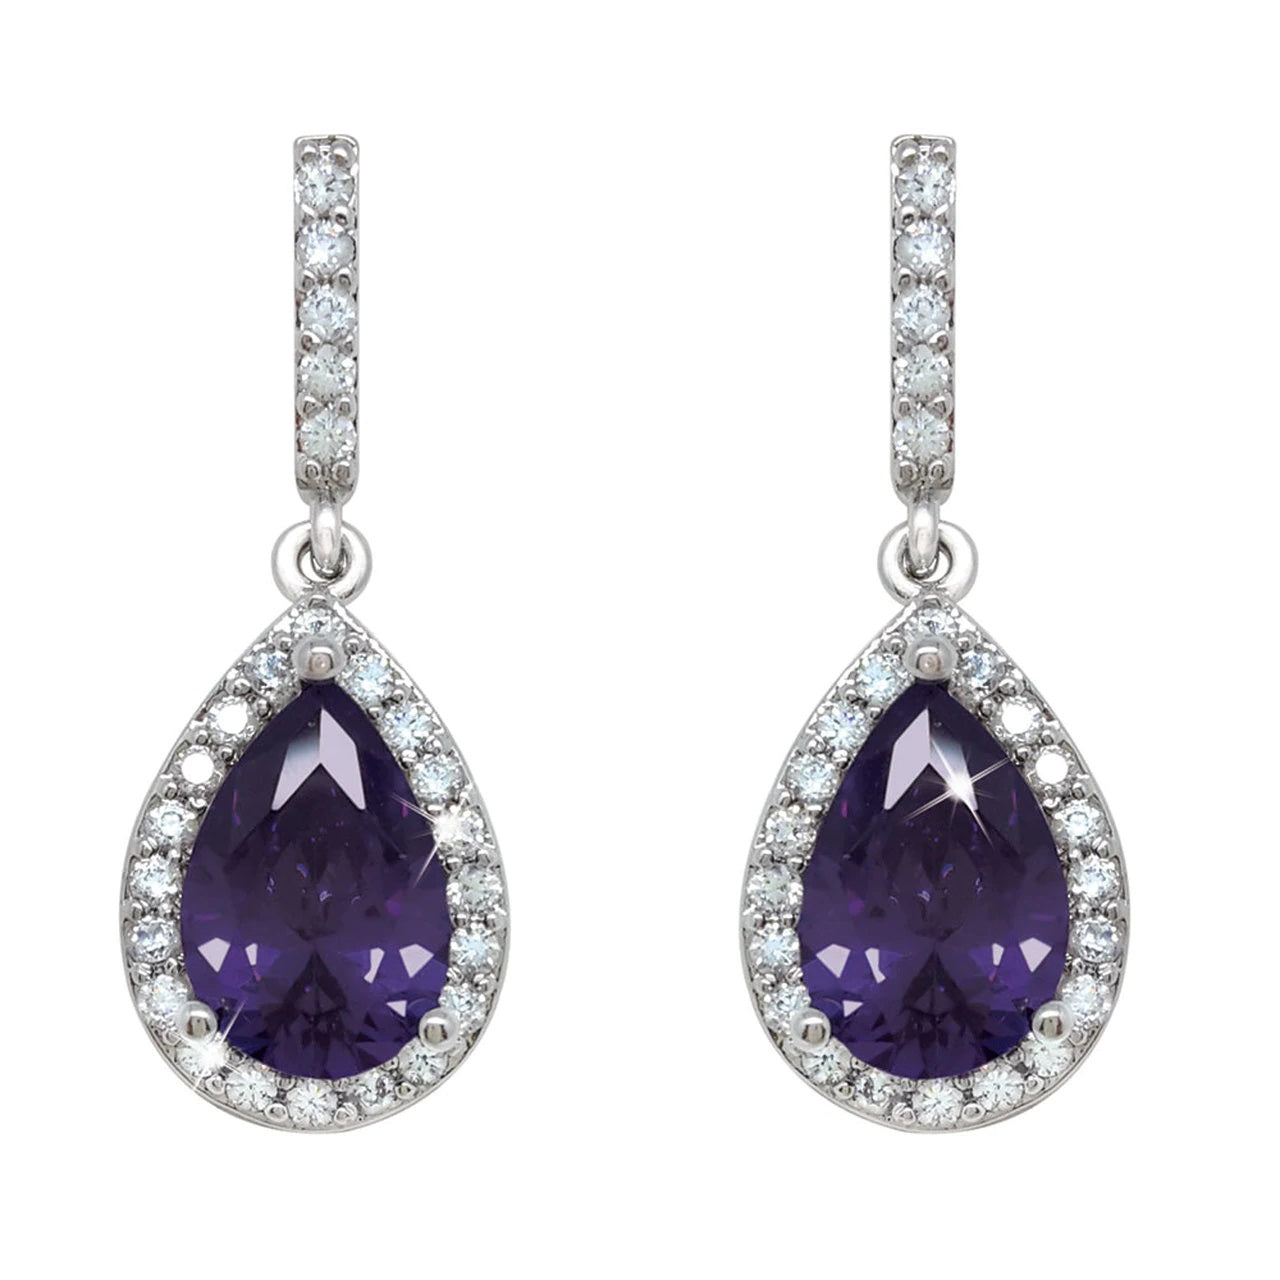 Tipperary Crystal Silver Pear Shape Earrings - Purple  Elegant and dramatic, these exquisite drop earrings are sure to be a favourite. Shimmering with beauty and sophistication they are created in timeless silver. Each dazzling design glistens endlessly with a sparkling pear-shaped centre stone bordered with a halo frame of luminous clear crystals accents.